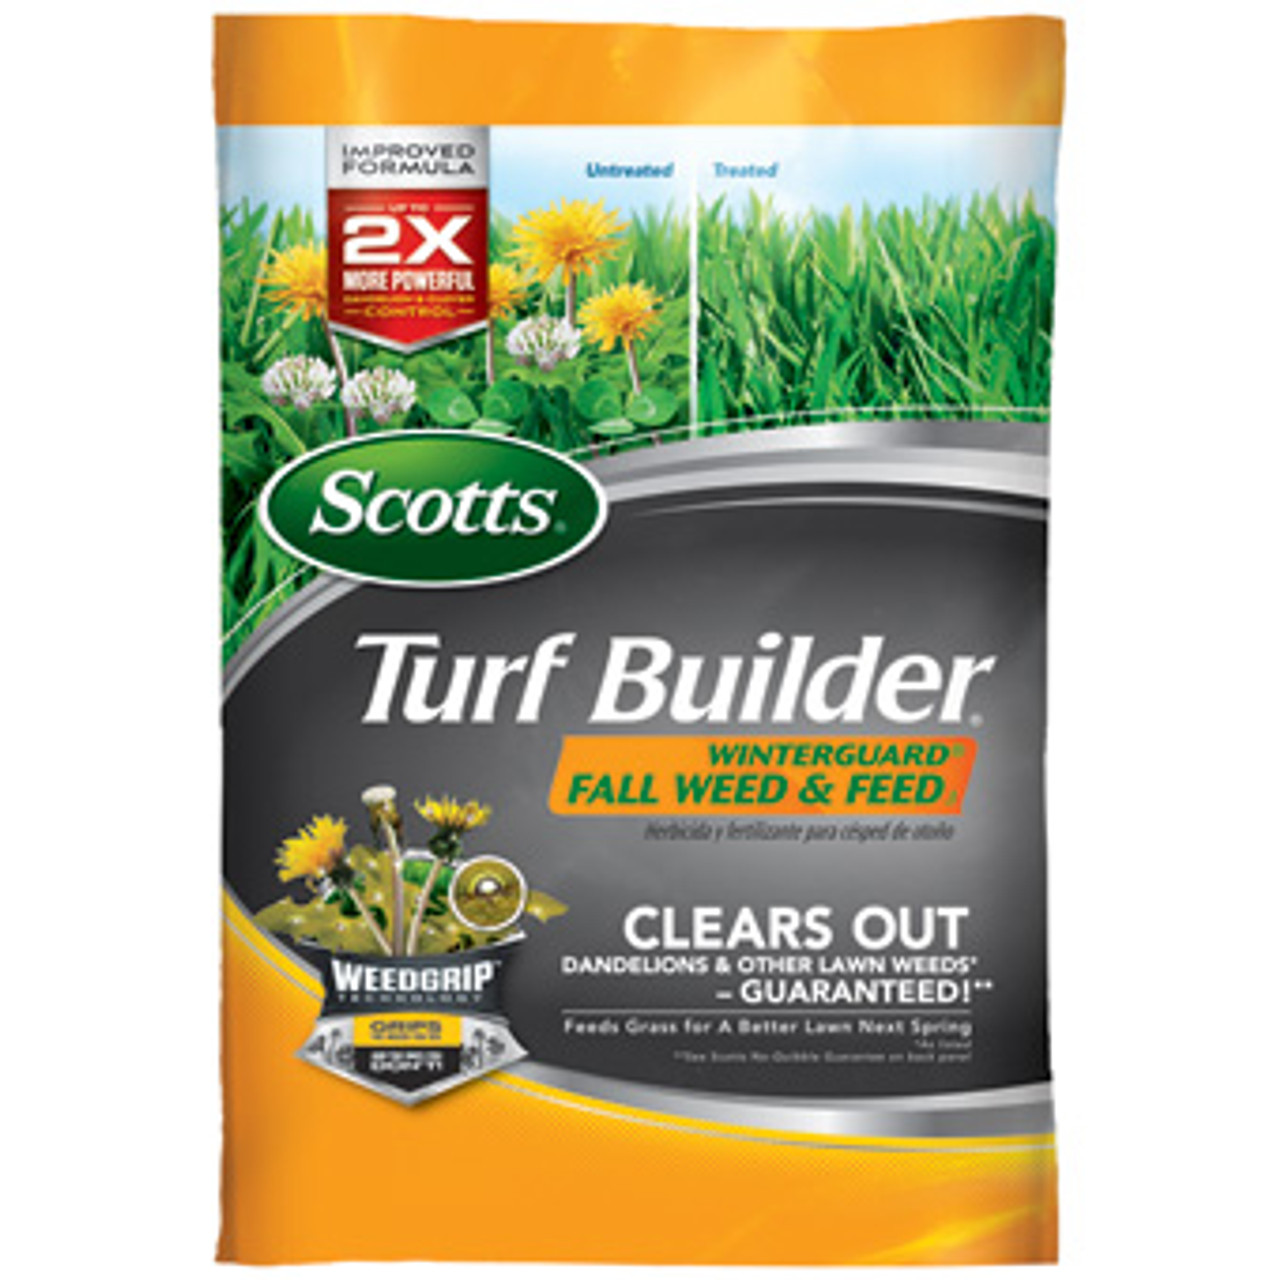 scotts-turf-builder-winterguard-fall-weed-feed-4m-maxwell-s-of-chelmsford